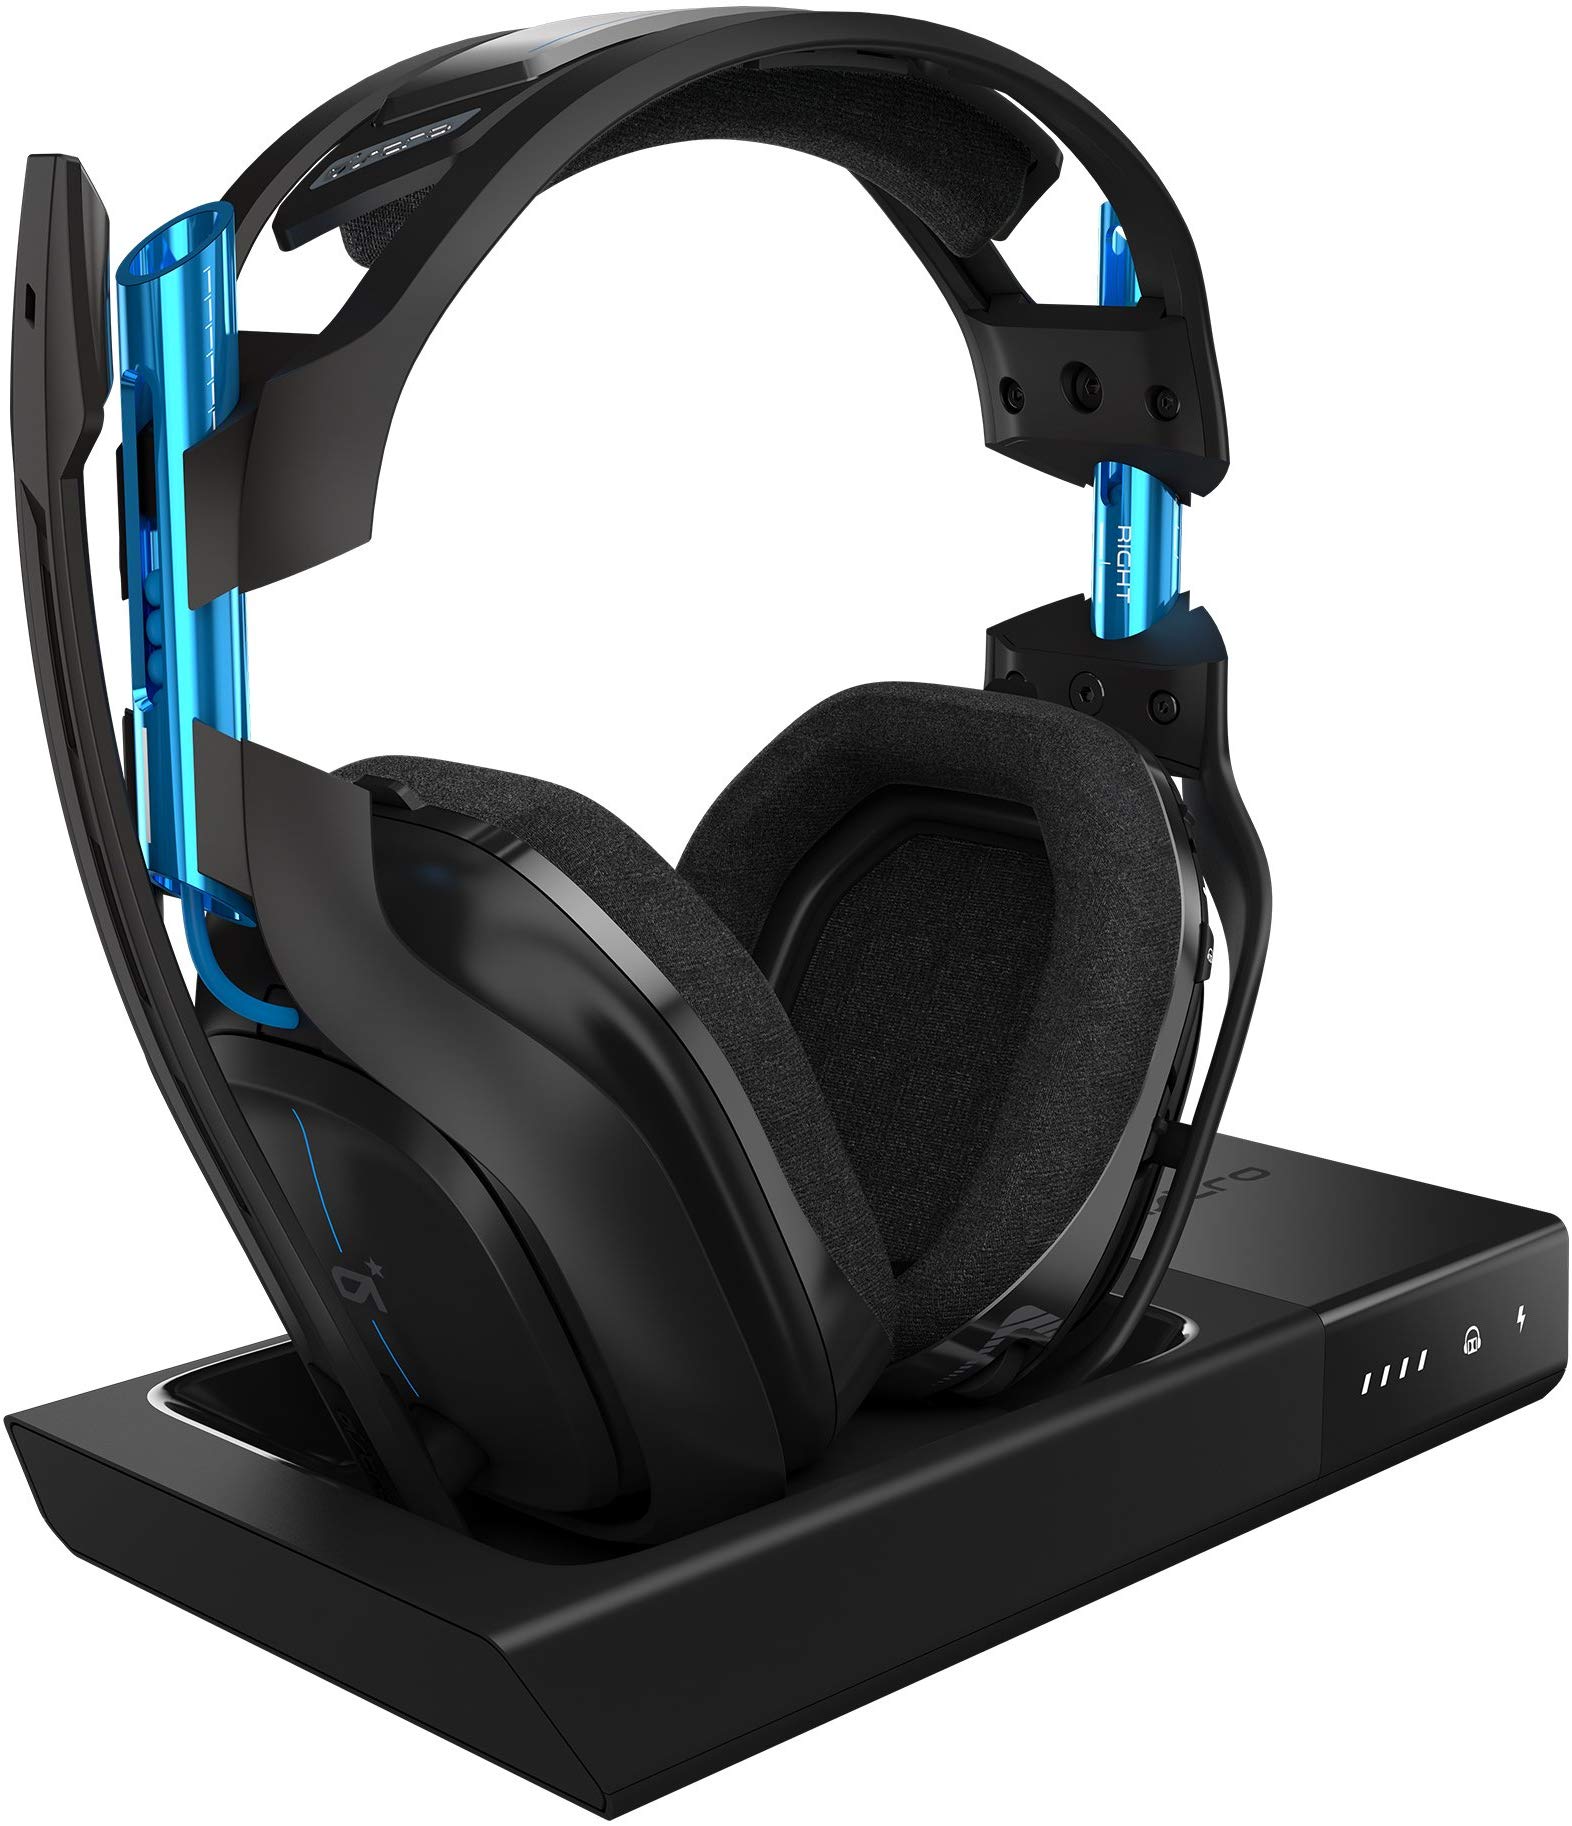 Gifts for Gamers 2022: Wireless Gaming Headset 2022